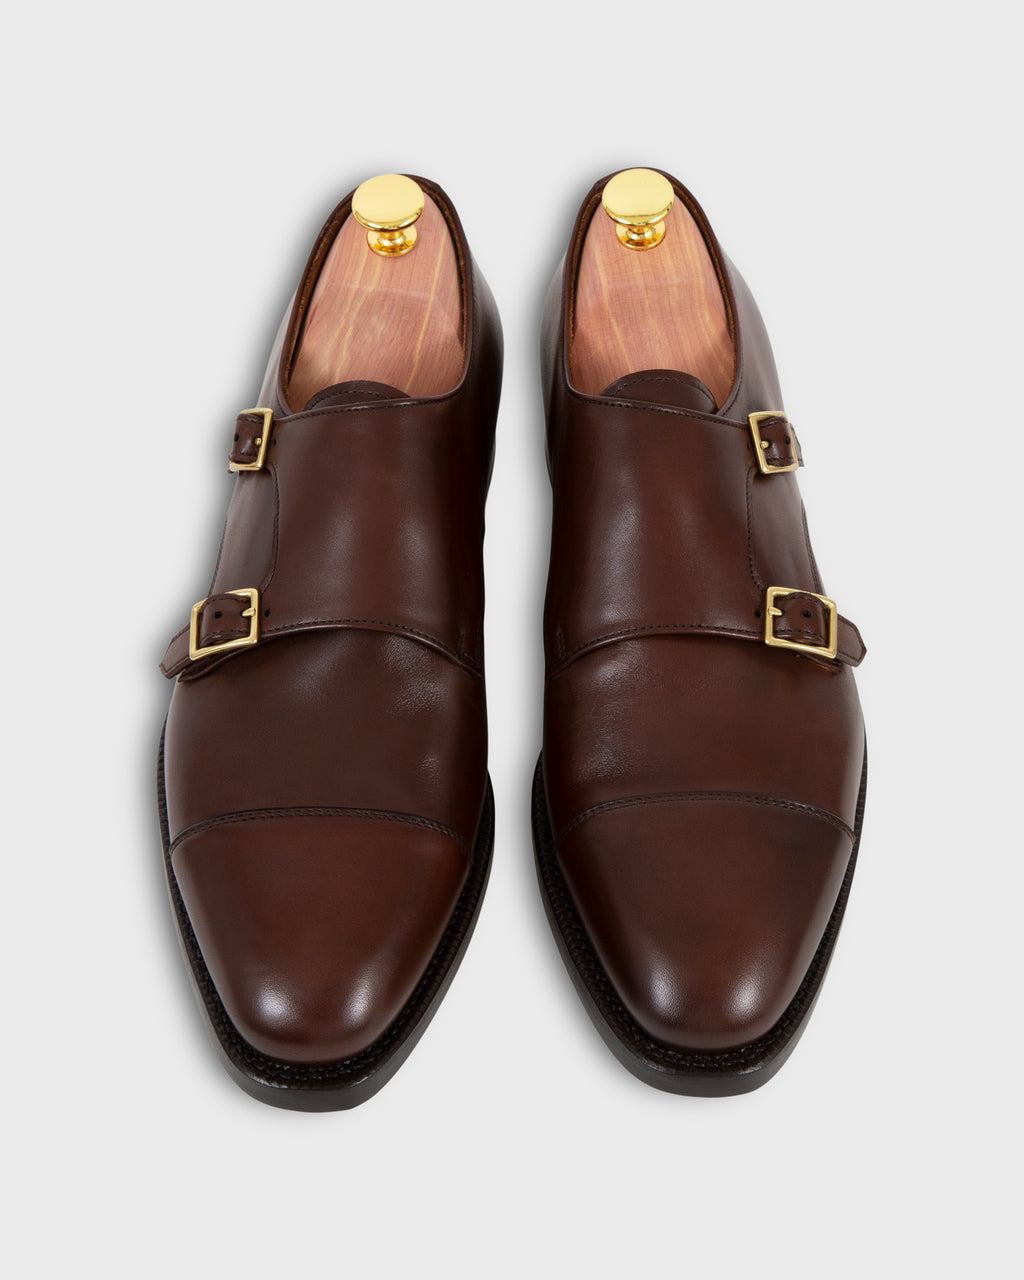 Goodyear welted shoes? | Shop Mashburn